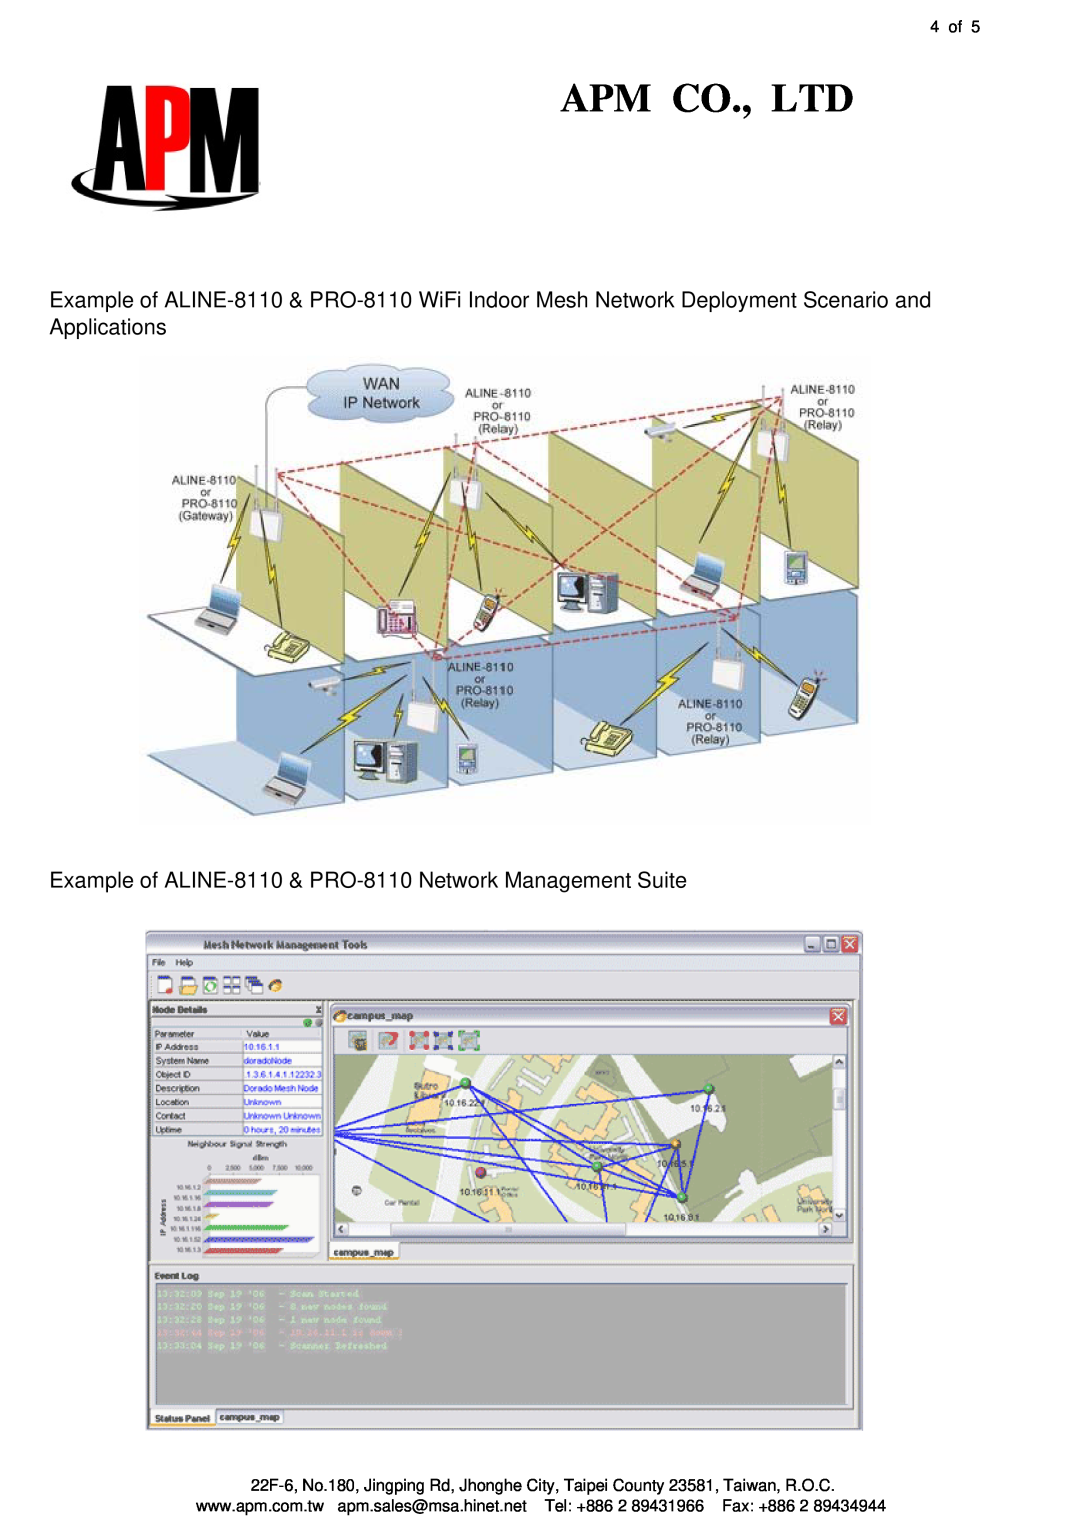 APM manual Example of ALINE-8110 & PRO-8110 Network Management Suite, 4 of 